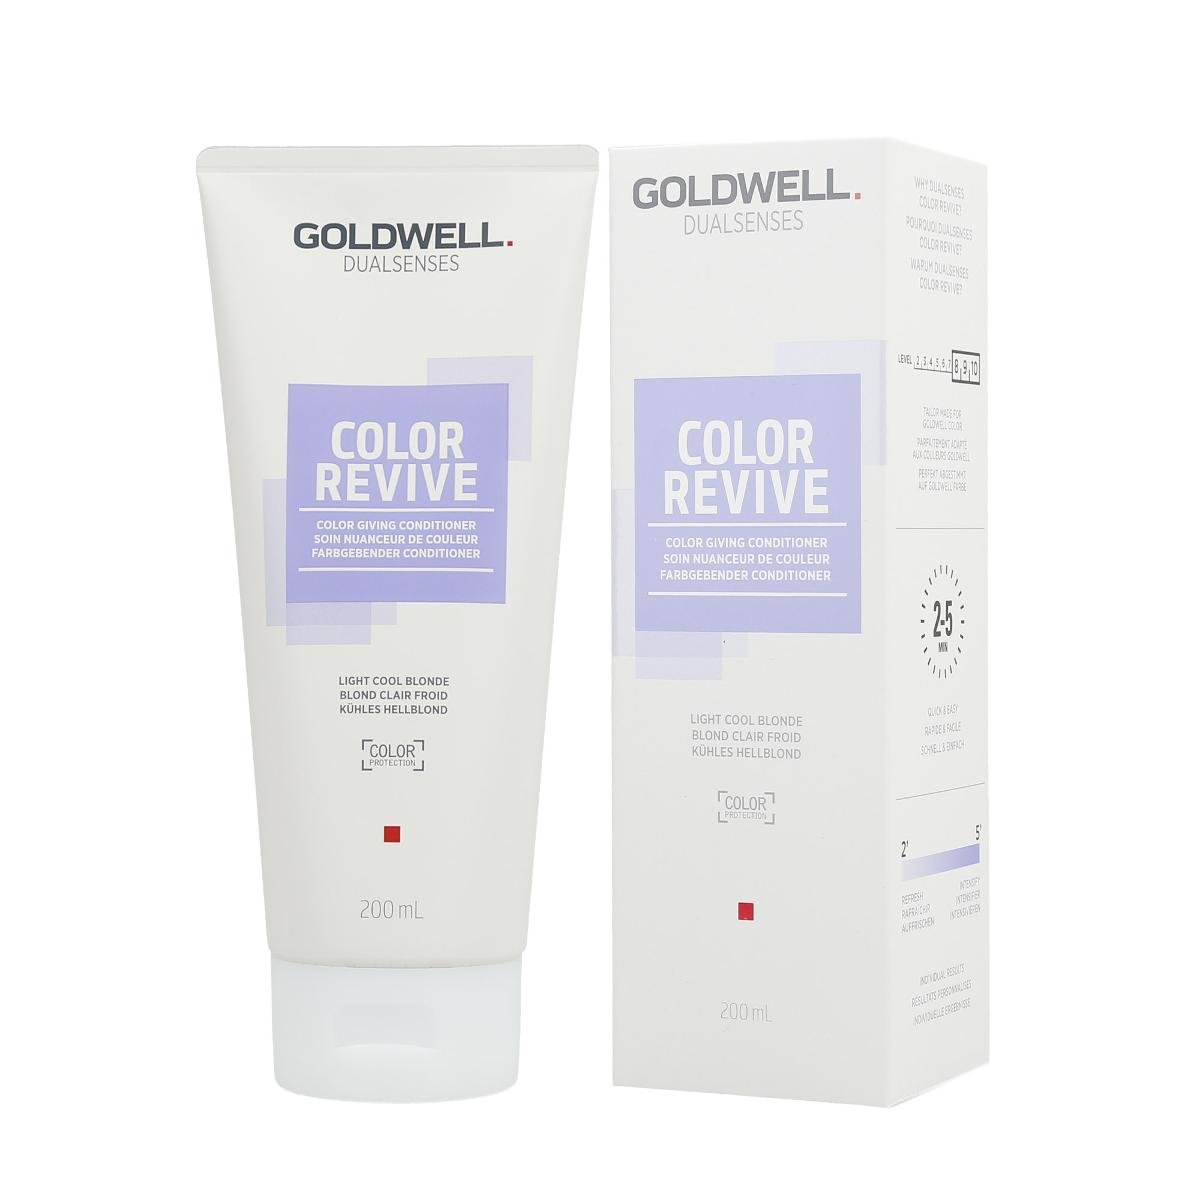 Goldwell Dualsenses Color Revive Color Giving Conditioner Light Cool Blonde